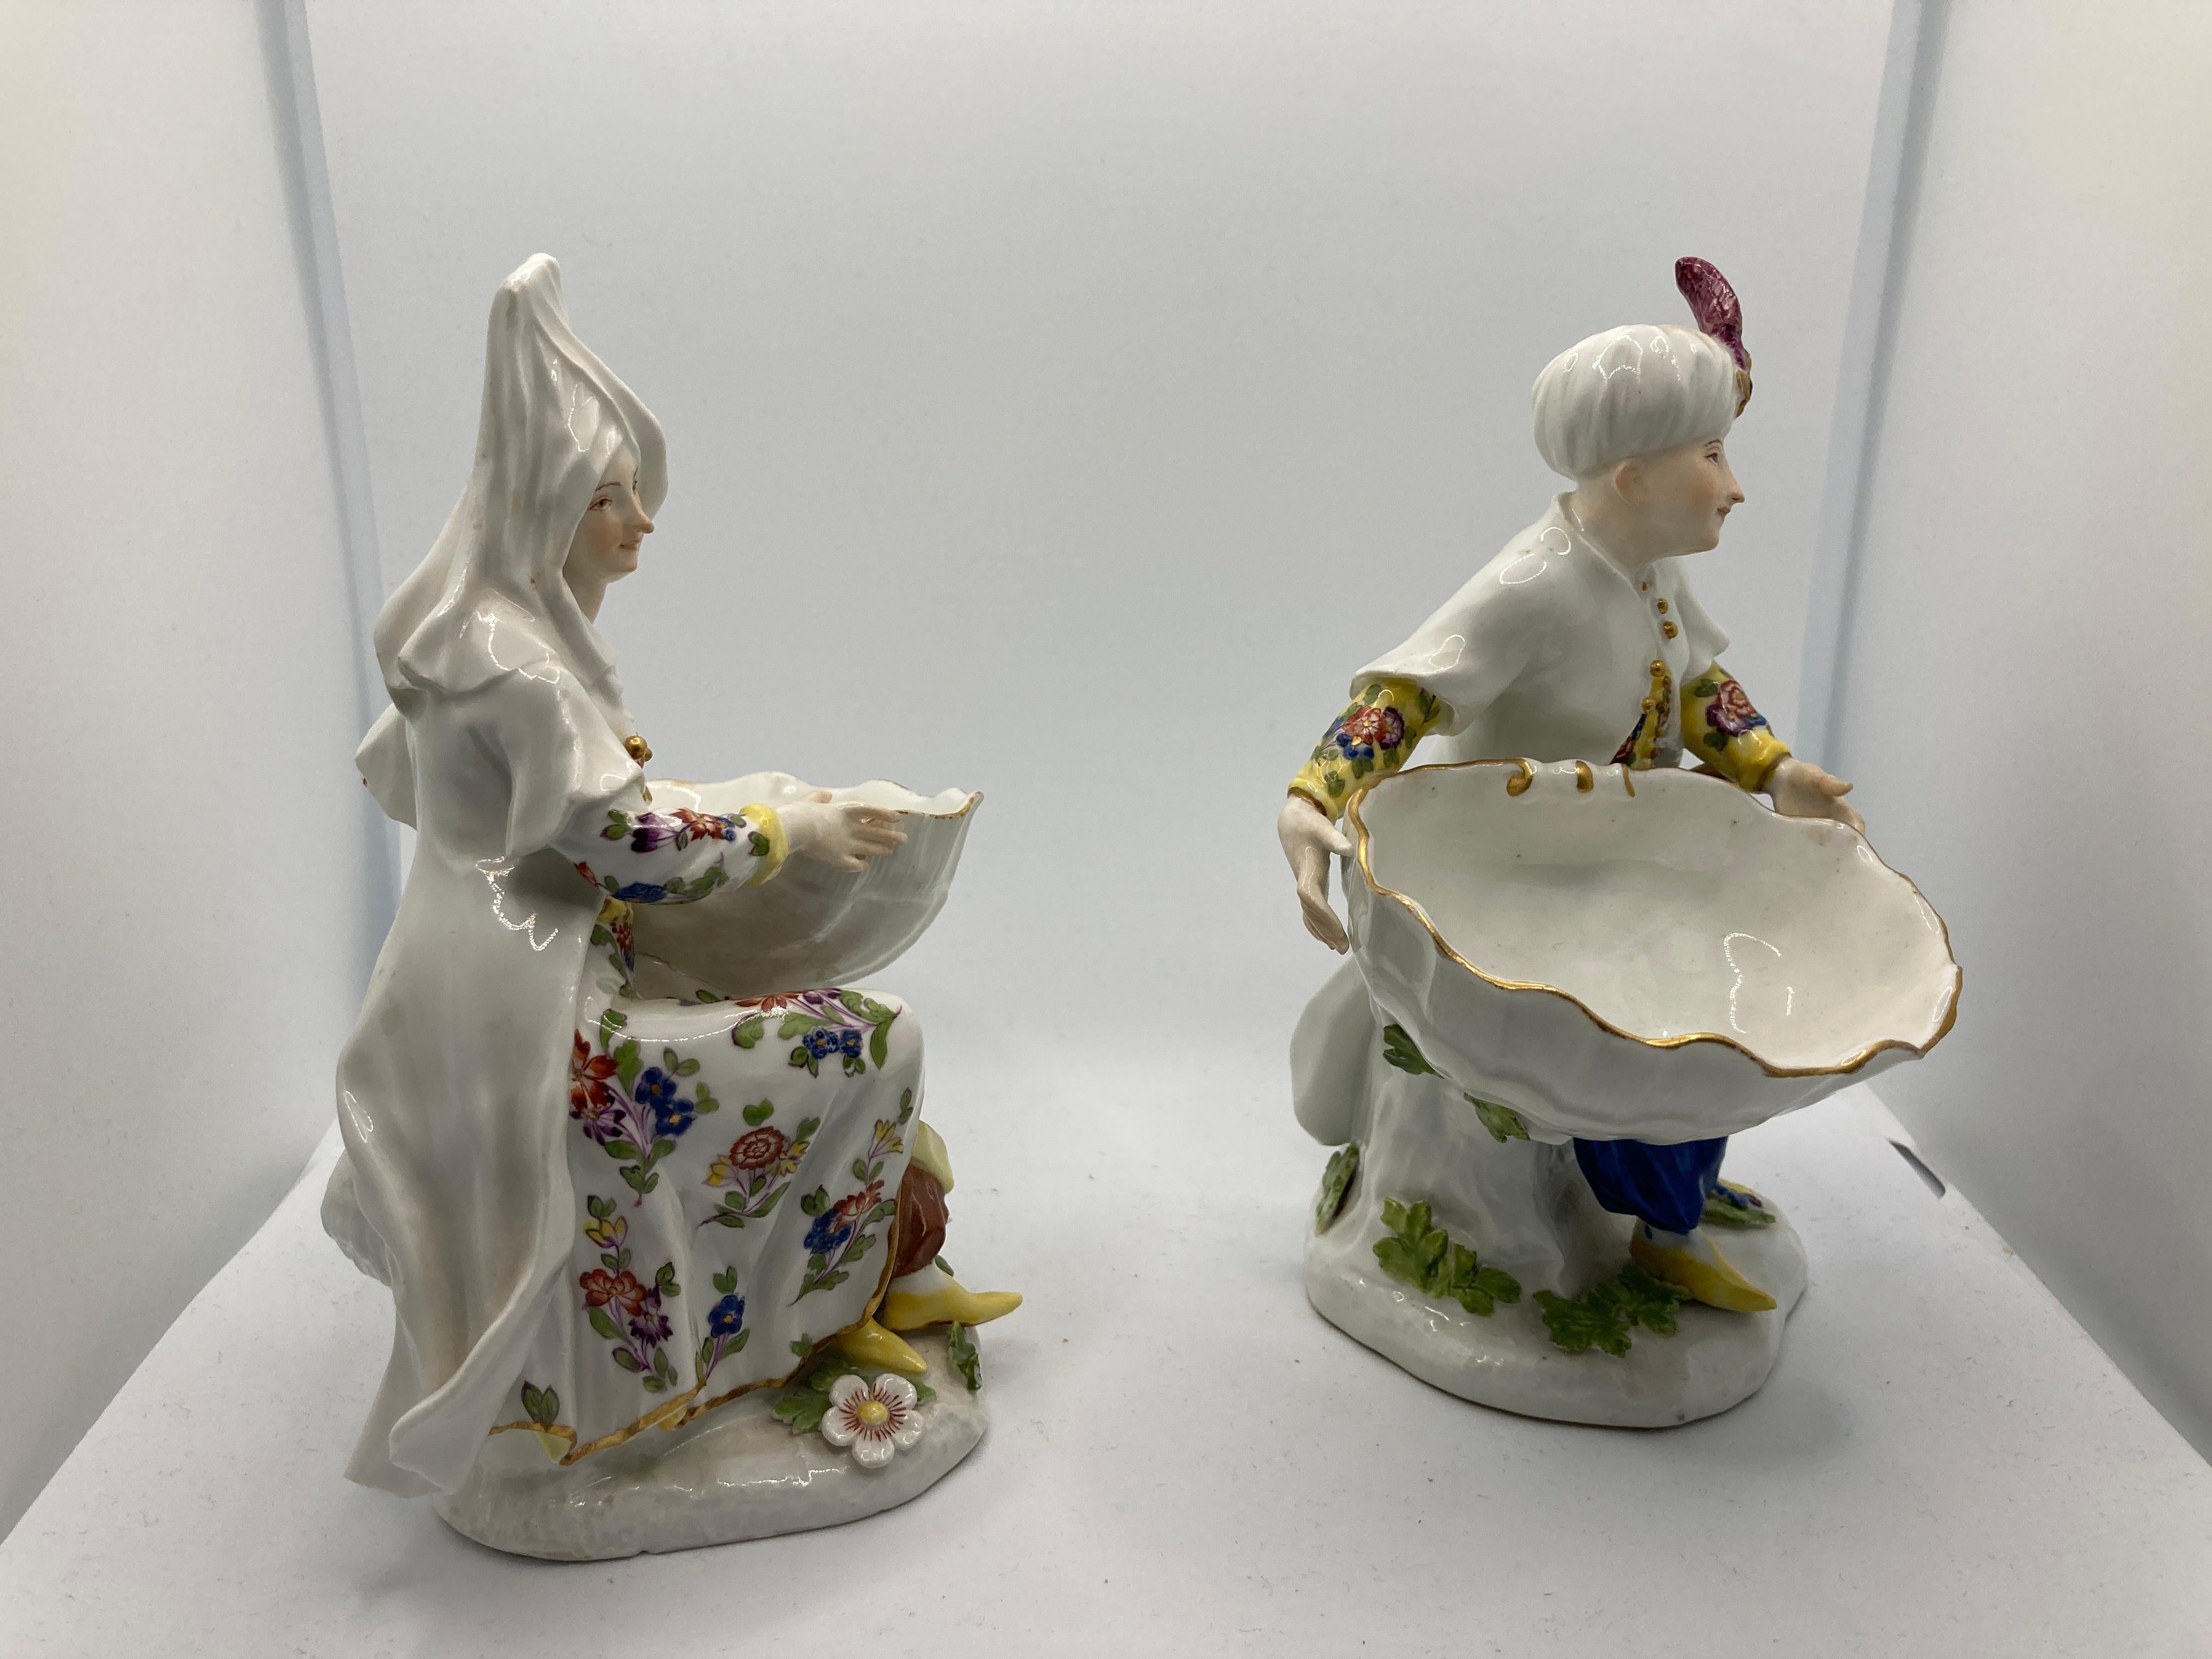 Hand-Crafted 18th Century Meissen Turkish Pair holding sweetmeat / table salt bowls For Sale